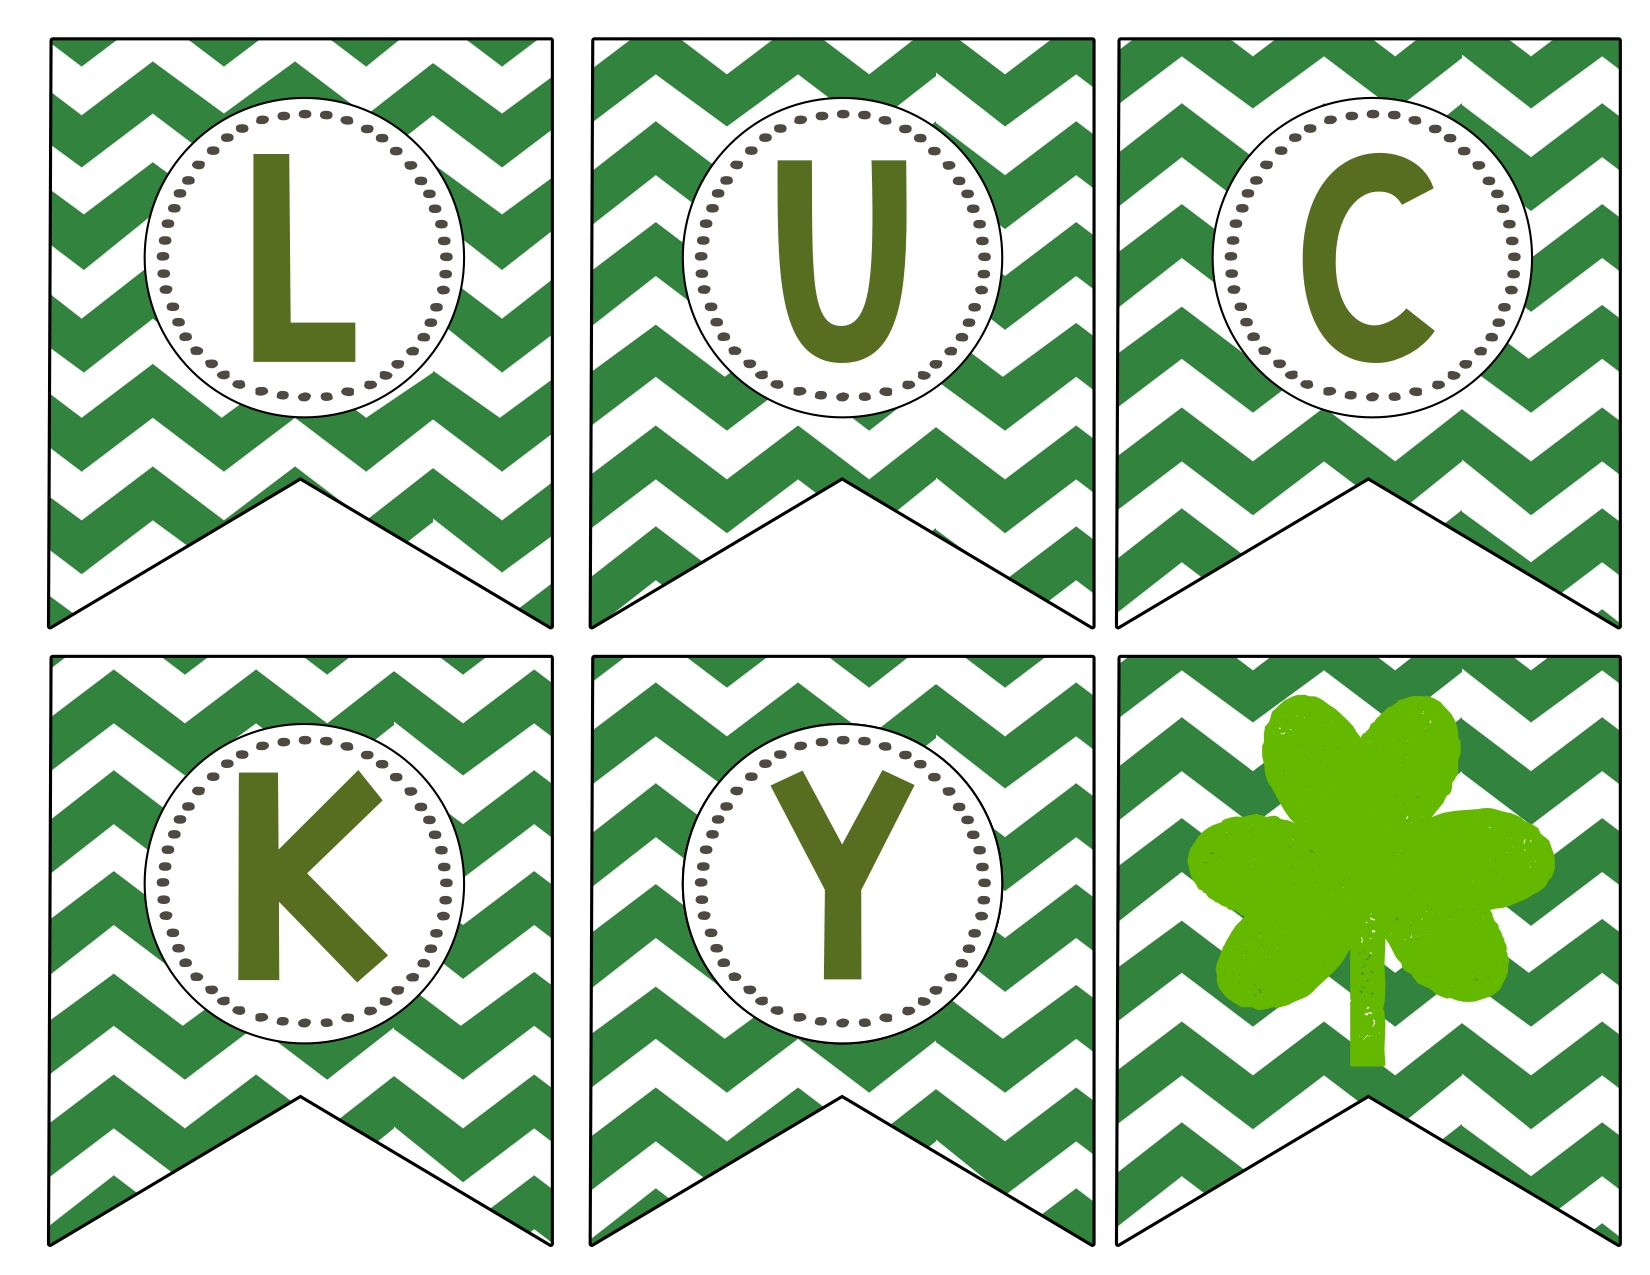 Free Printable St Patrick's Day Banner - Free Printable St Patrick's Day Banner